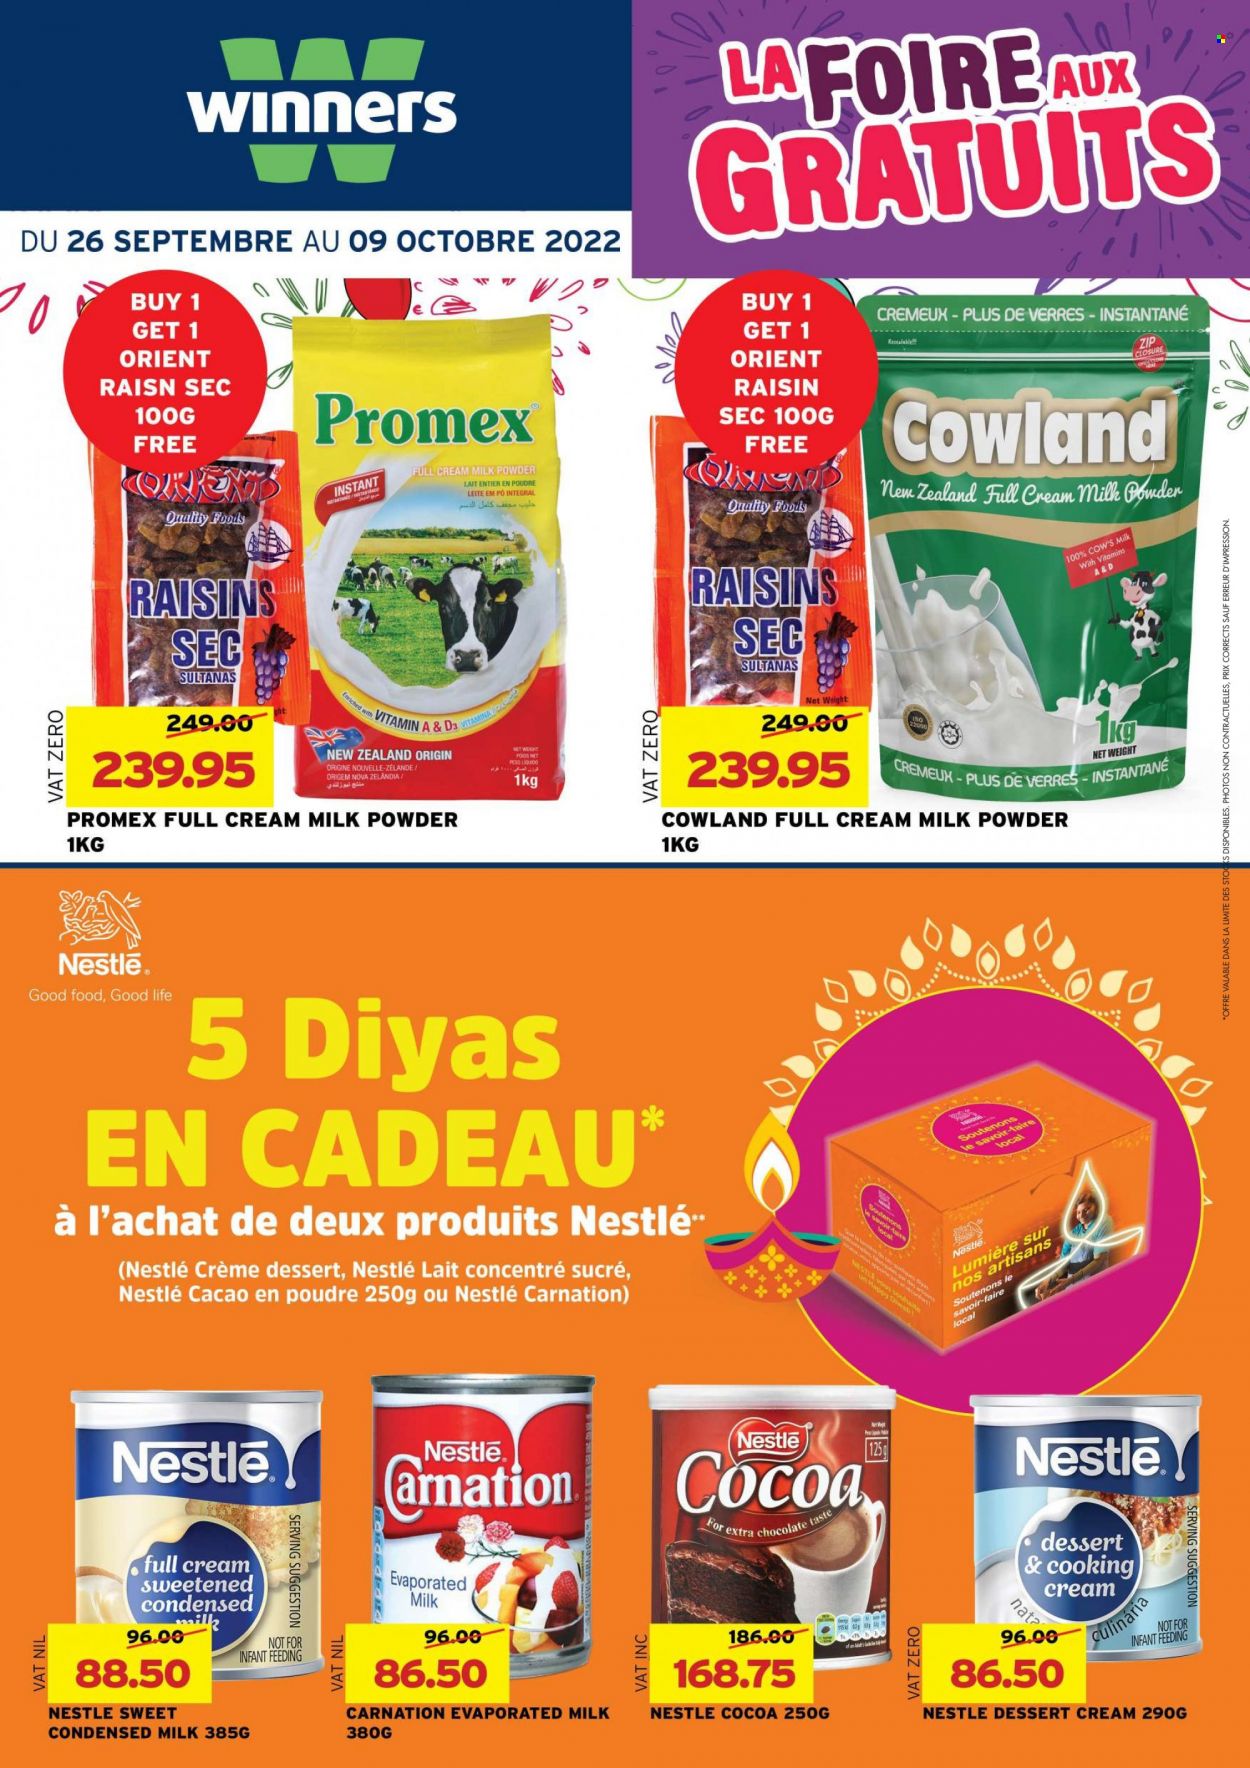 thumbnail - Winner's Catalogue - 26.09.2022 - 9.10.2022 - Sales products - evaporated milk, condensed milk, milk powder, chocolate, cocoa, Good Life, sultanas, dried fruit, mouse, vitamin D3, Nestlé, raisins. Page 3.